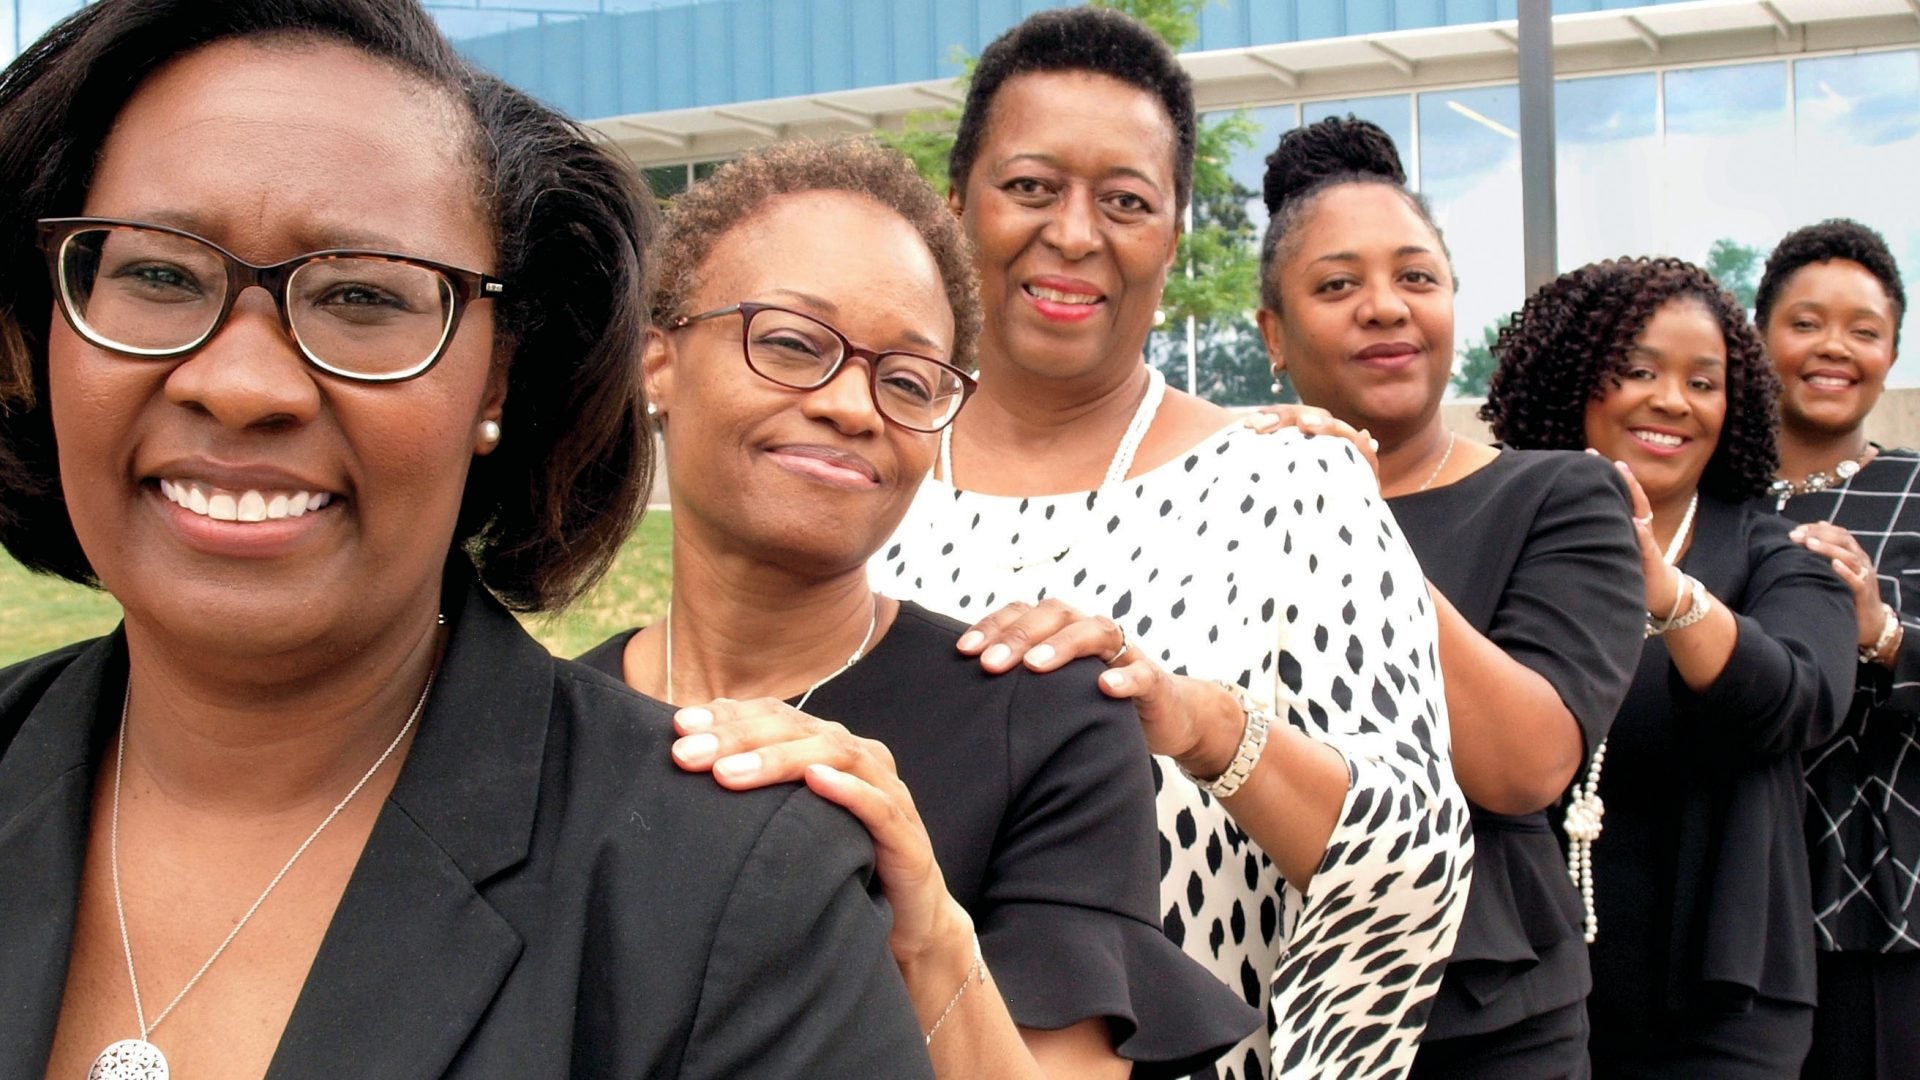 All Rise: A Record Number of Black Women Judges Have Been Appointed in Colorado